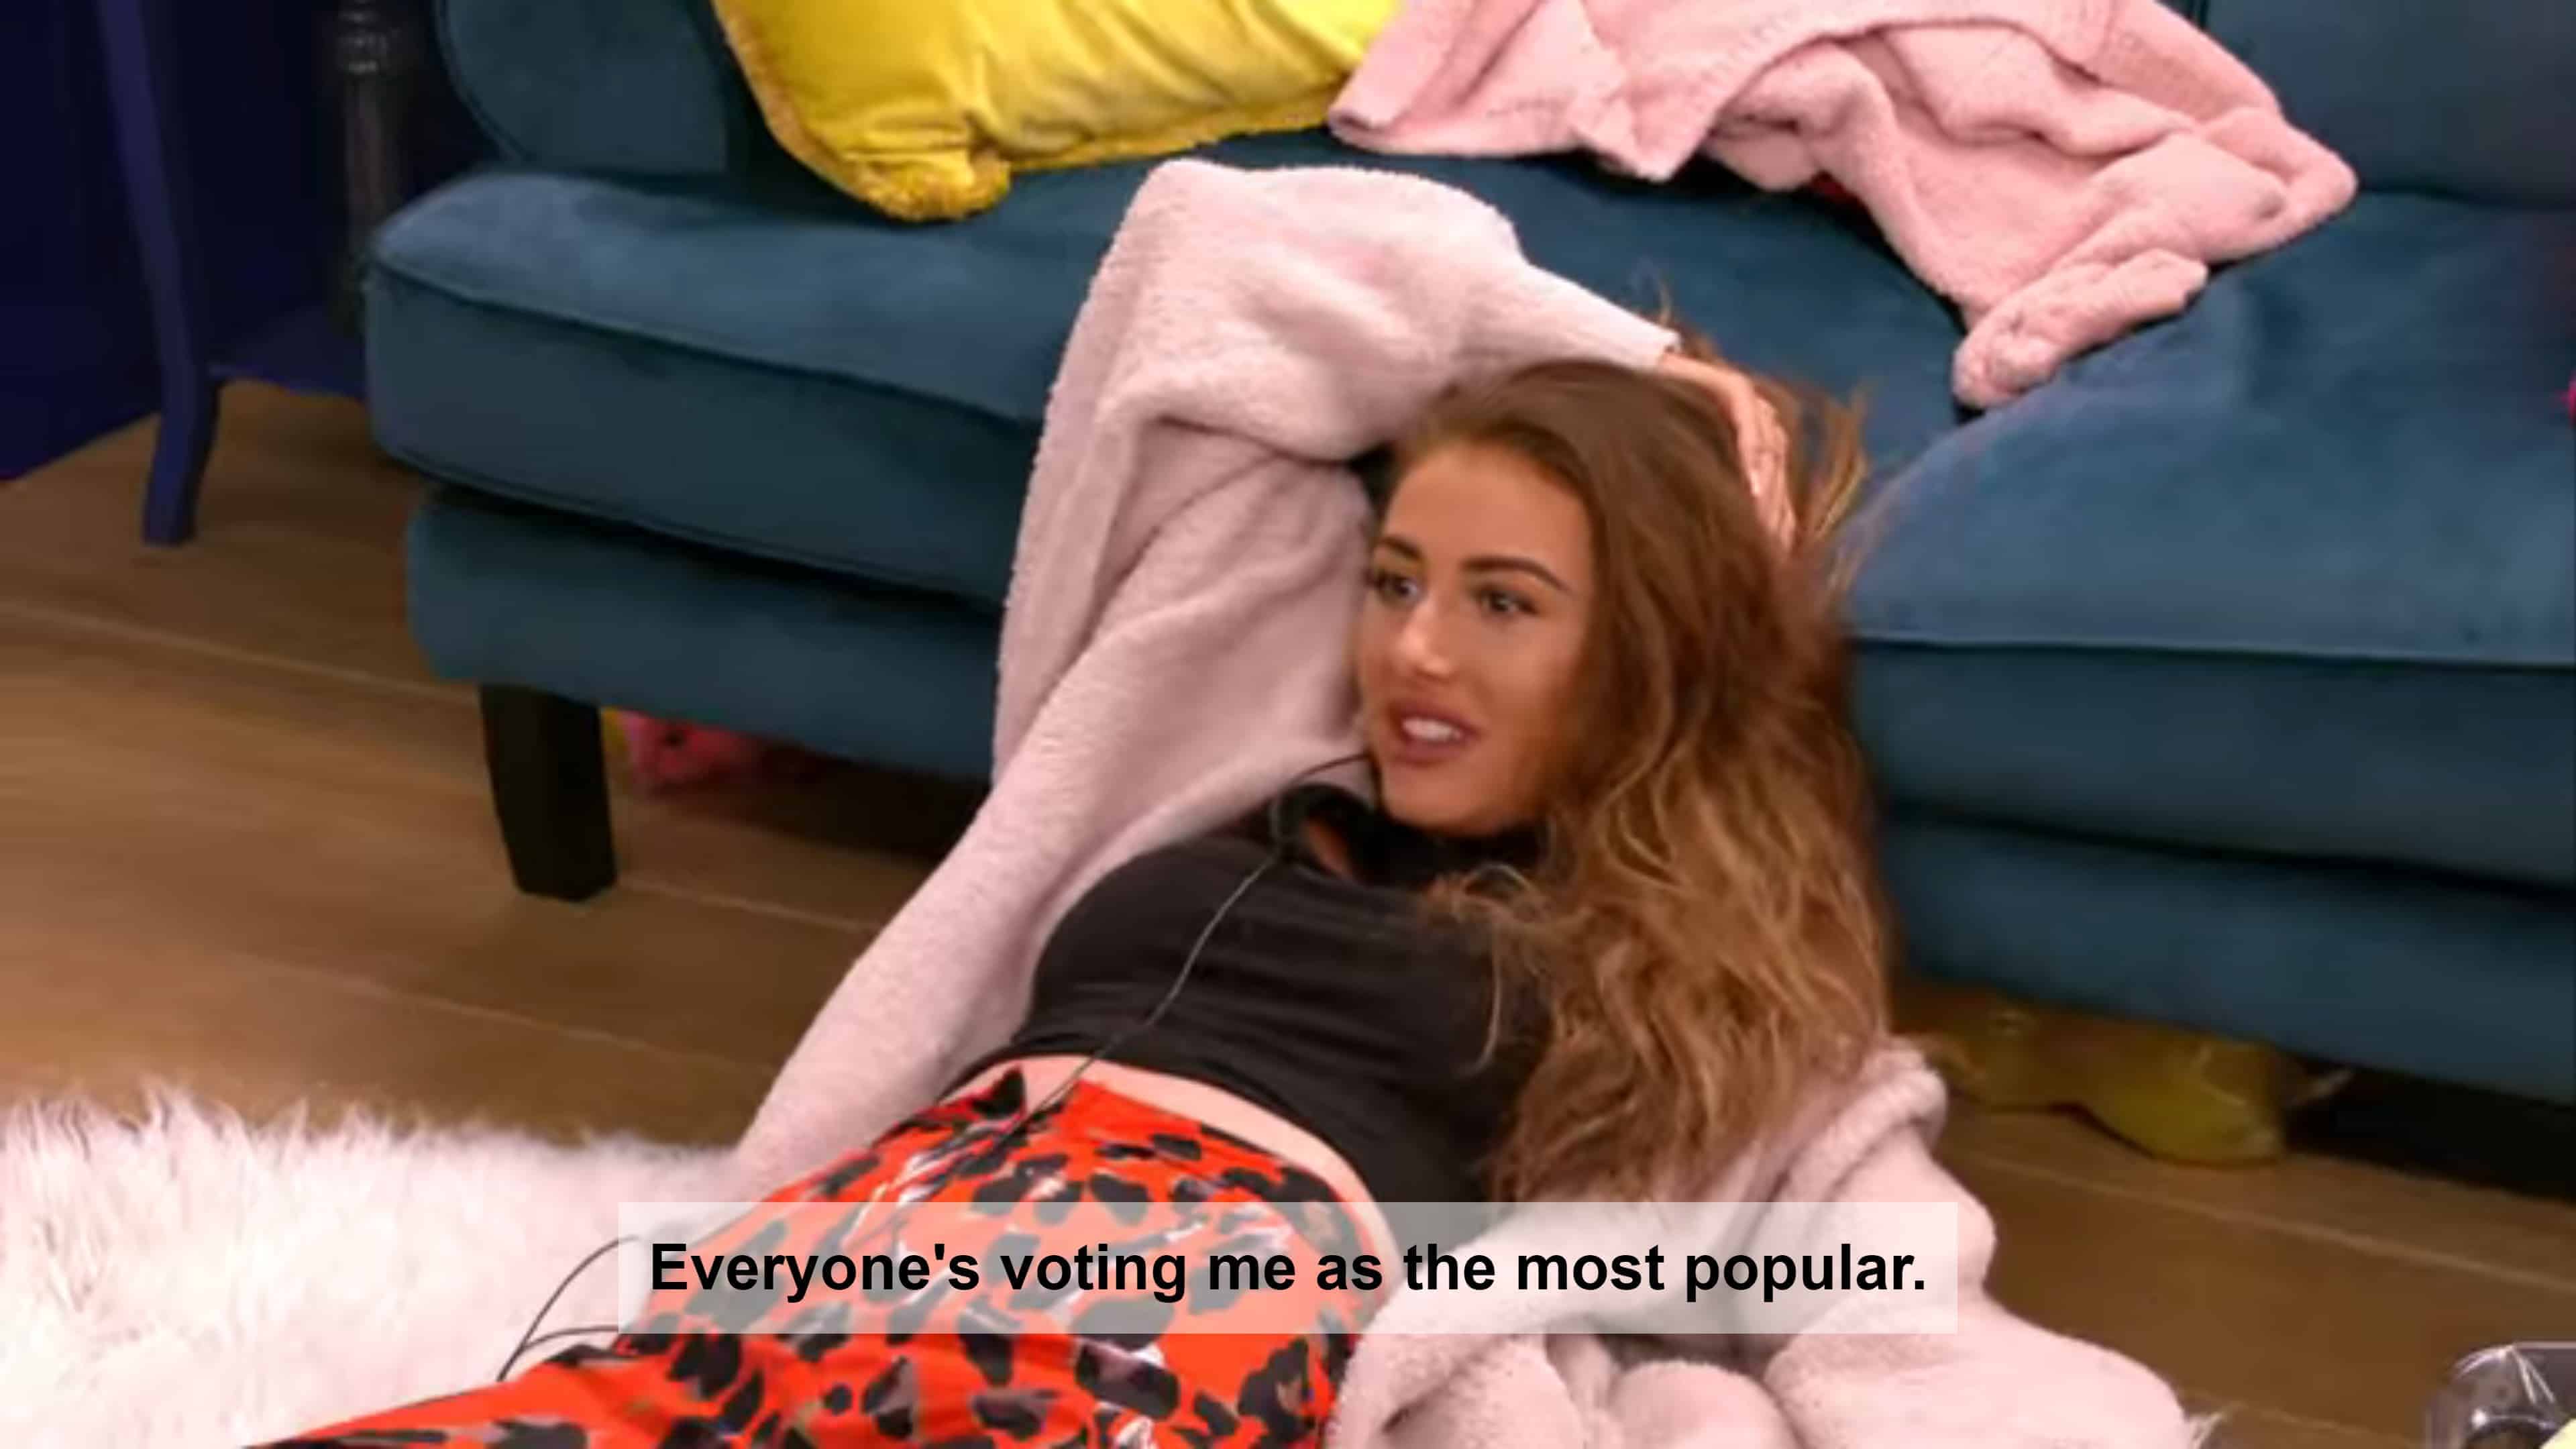 Chloe overwhelmed by all the votes she got